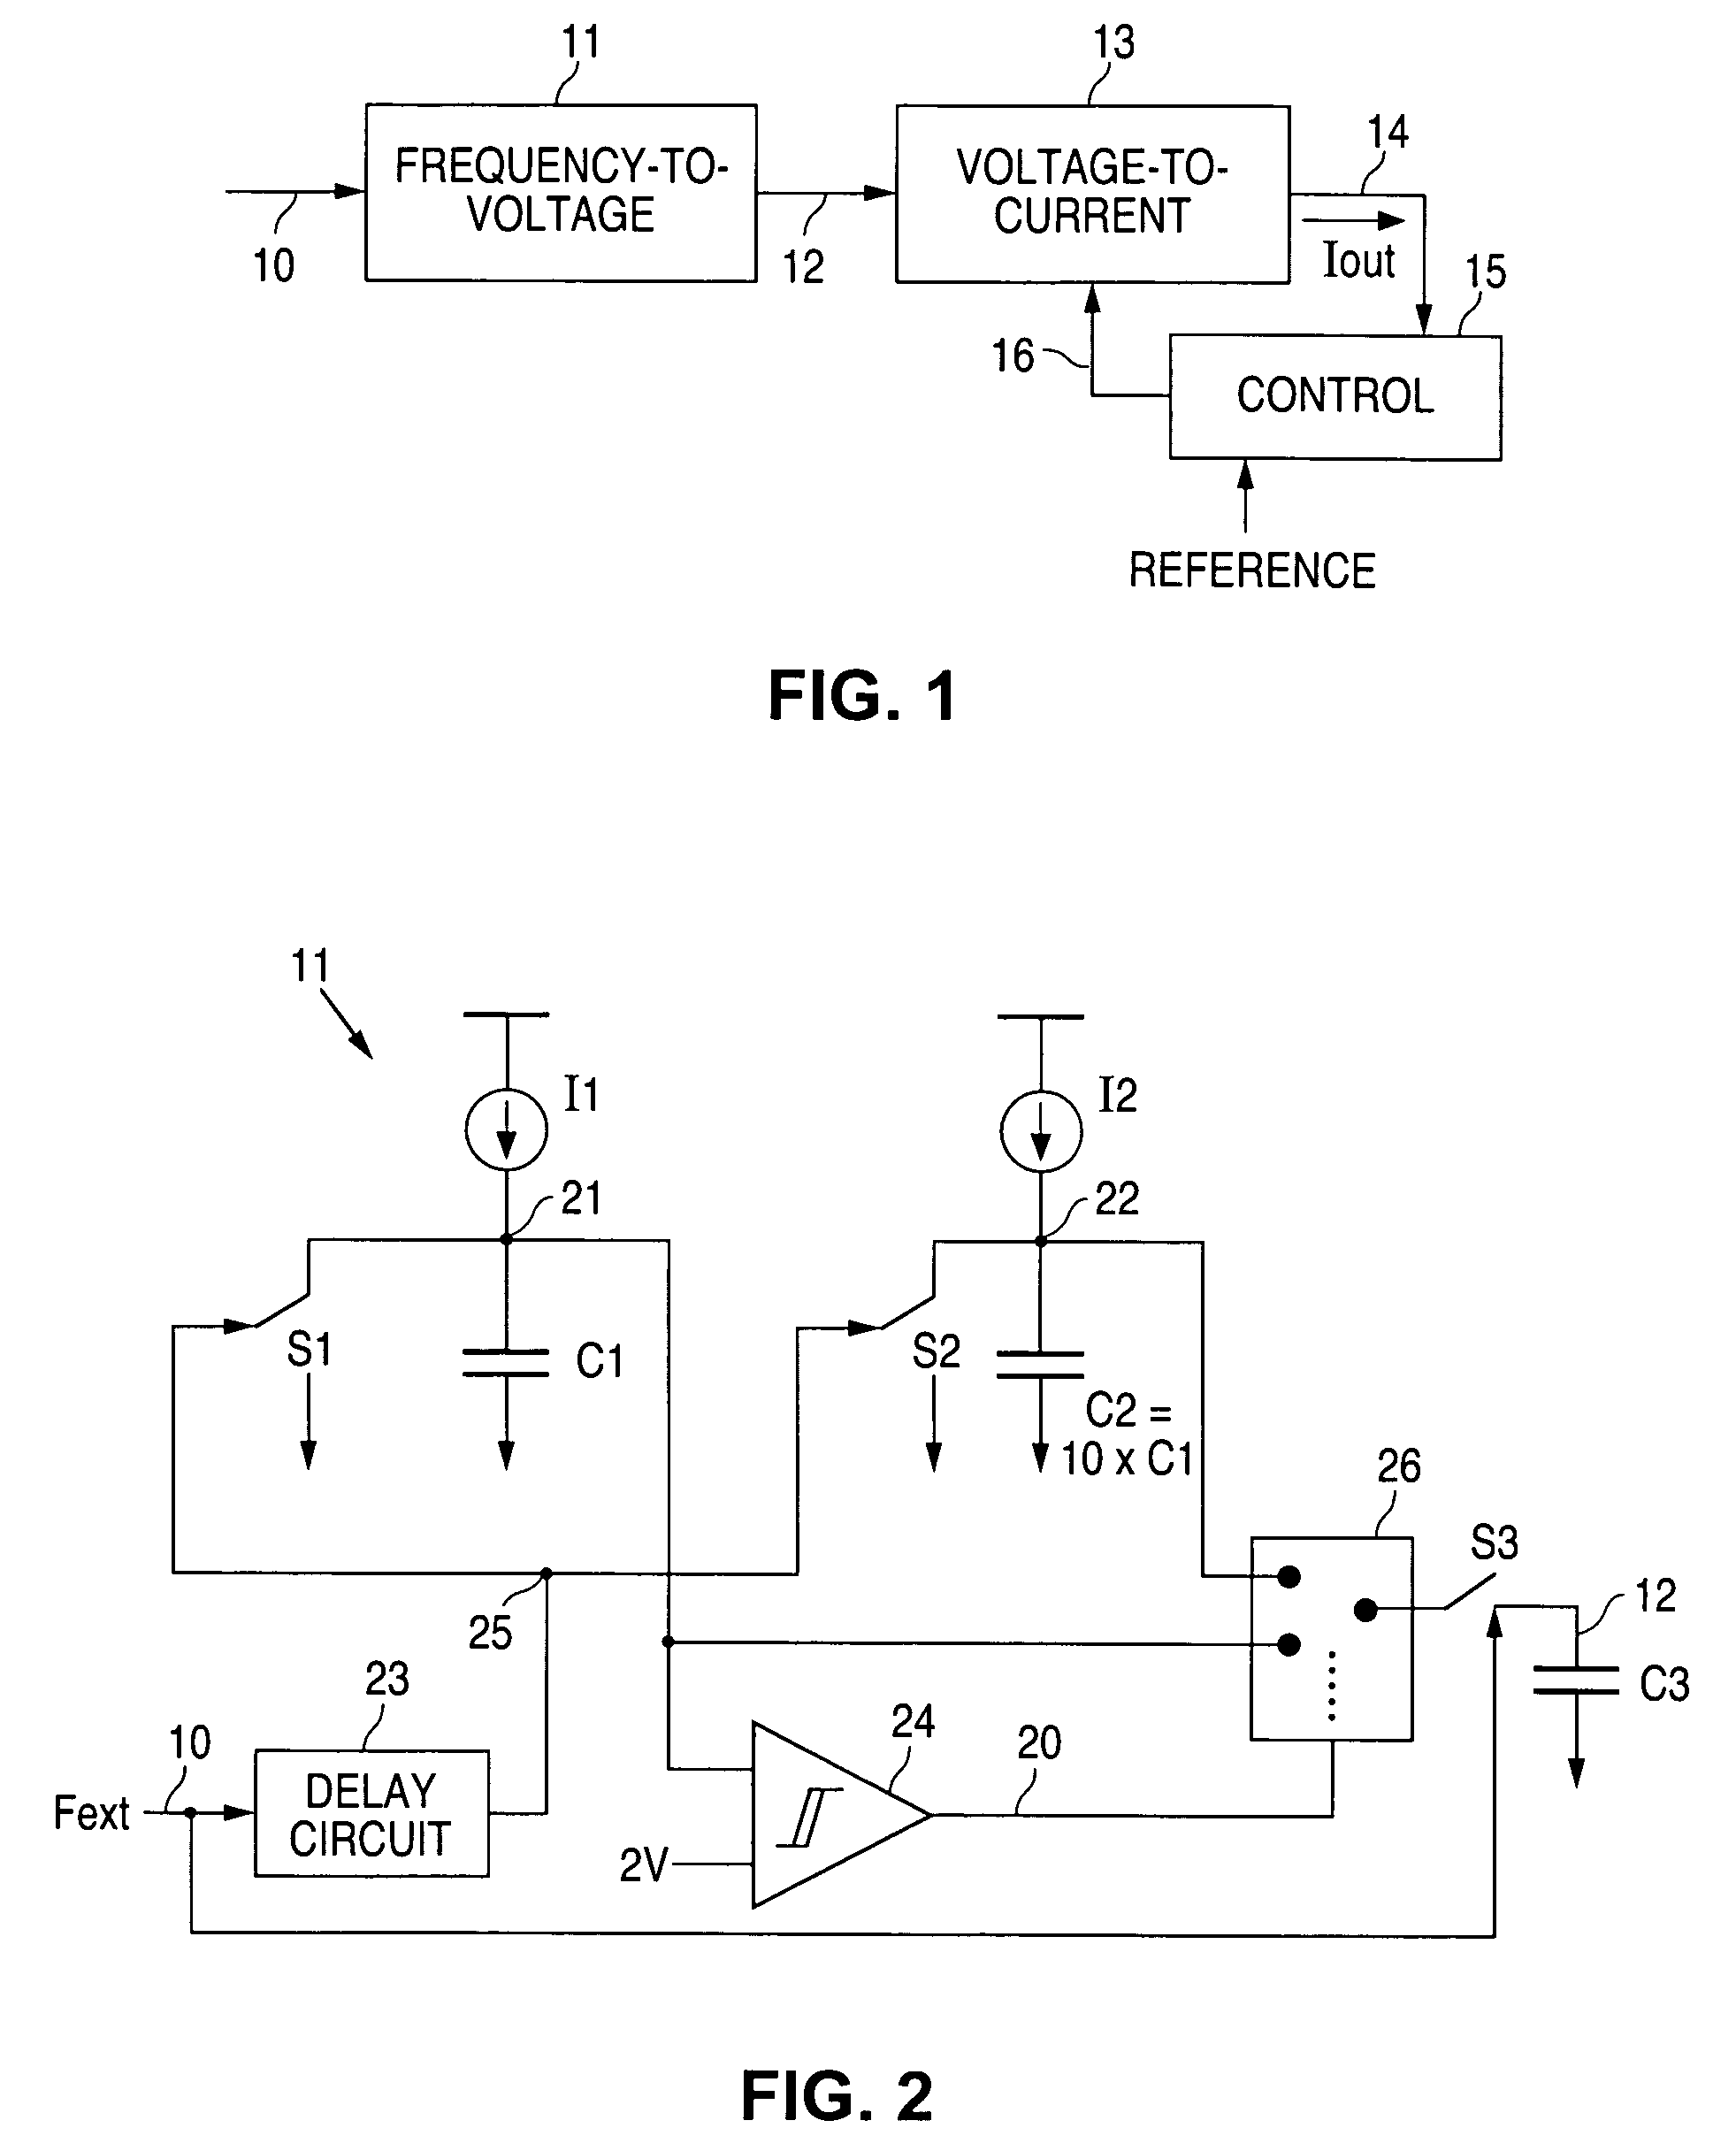 Producing a frequency-representative signal with rapid adjustment to frequency changes